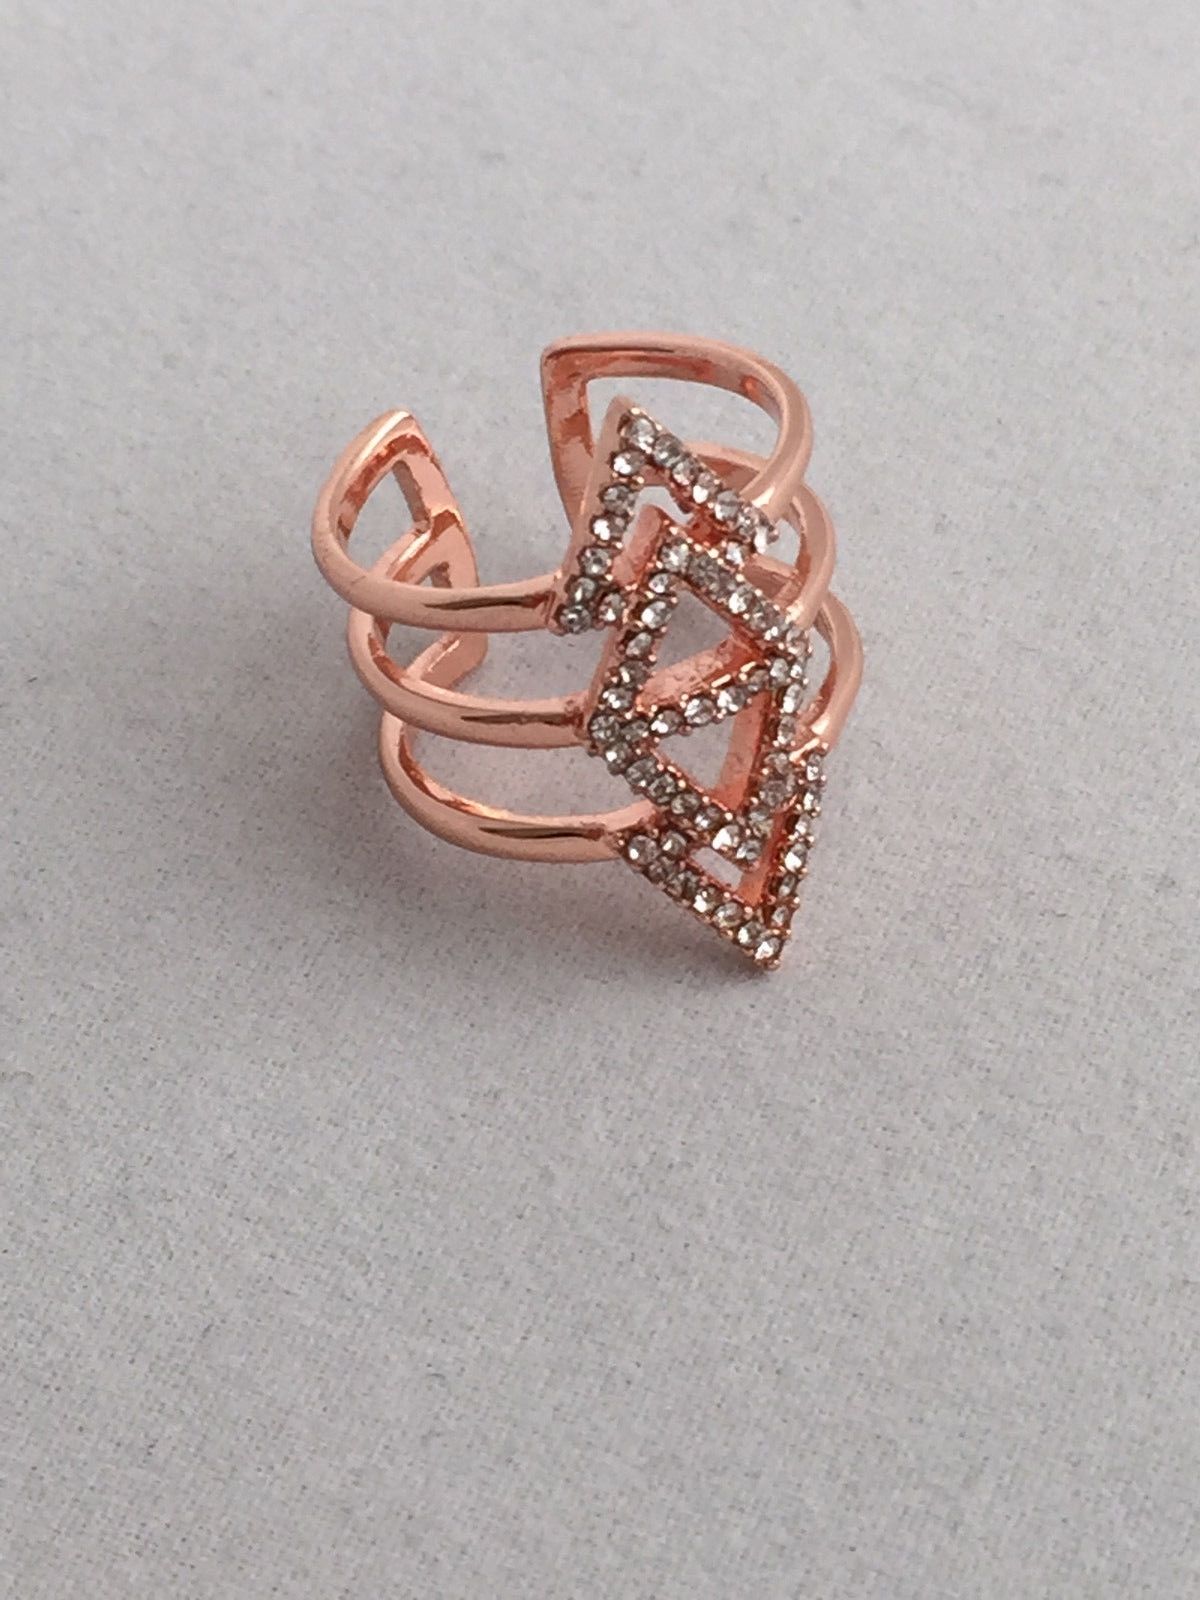 New Stella & Dot Pave Spear Ring Rose Gold Size Adjustable Med Lg Regarding Most Current Stella And Dot Chevron Rings (View 5 of 15)